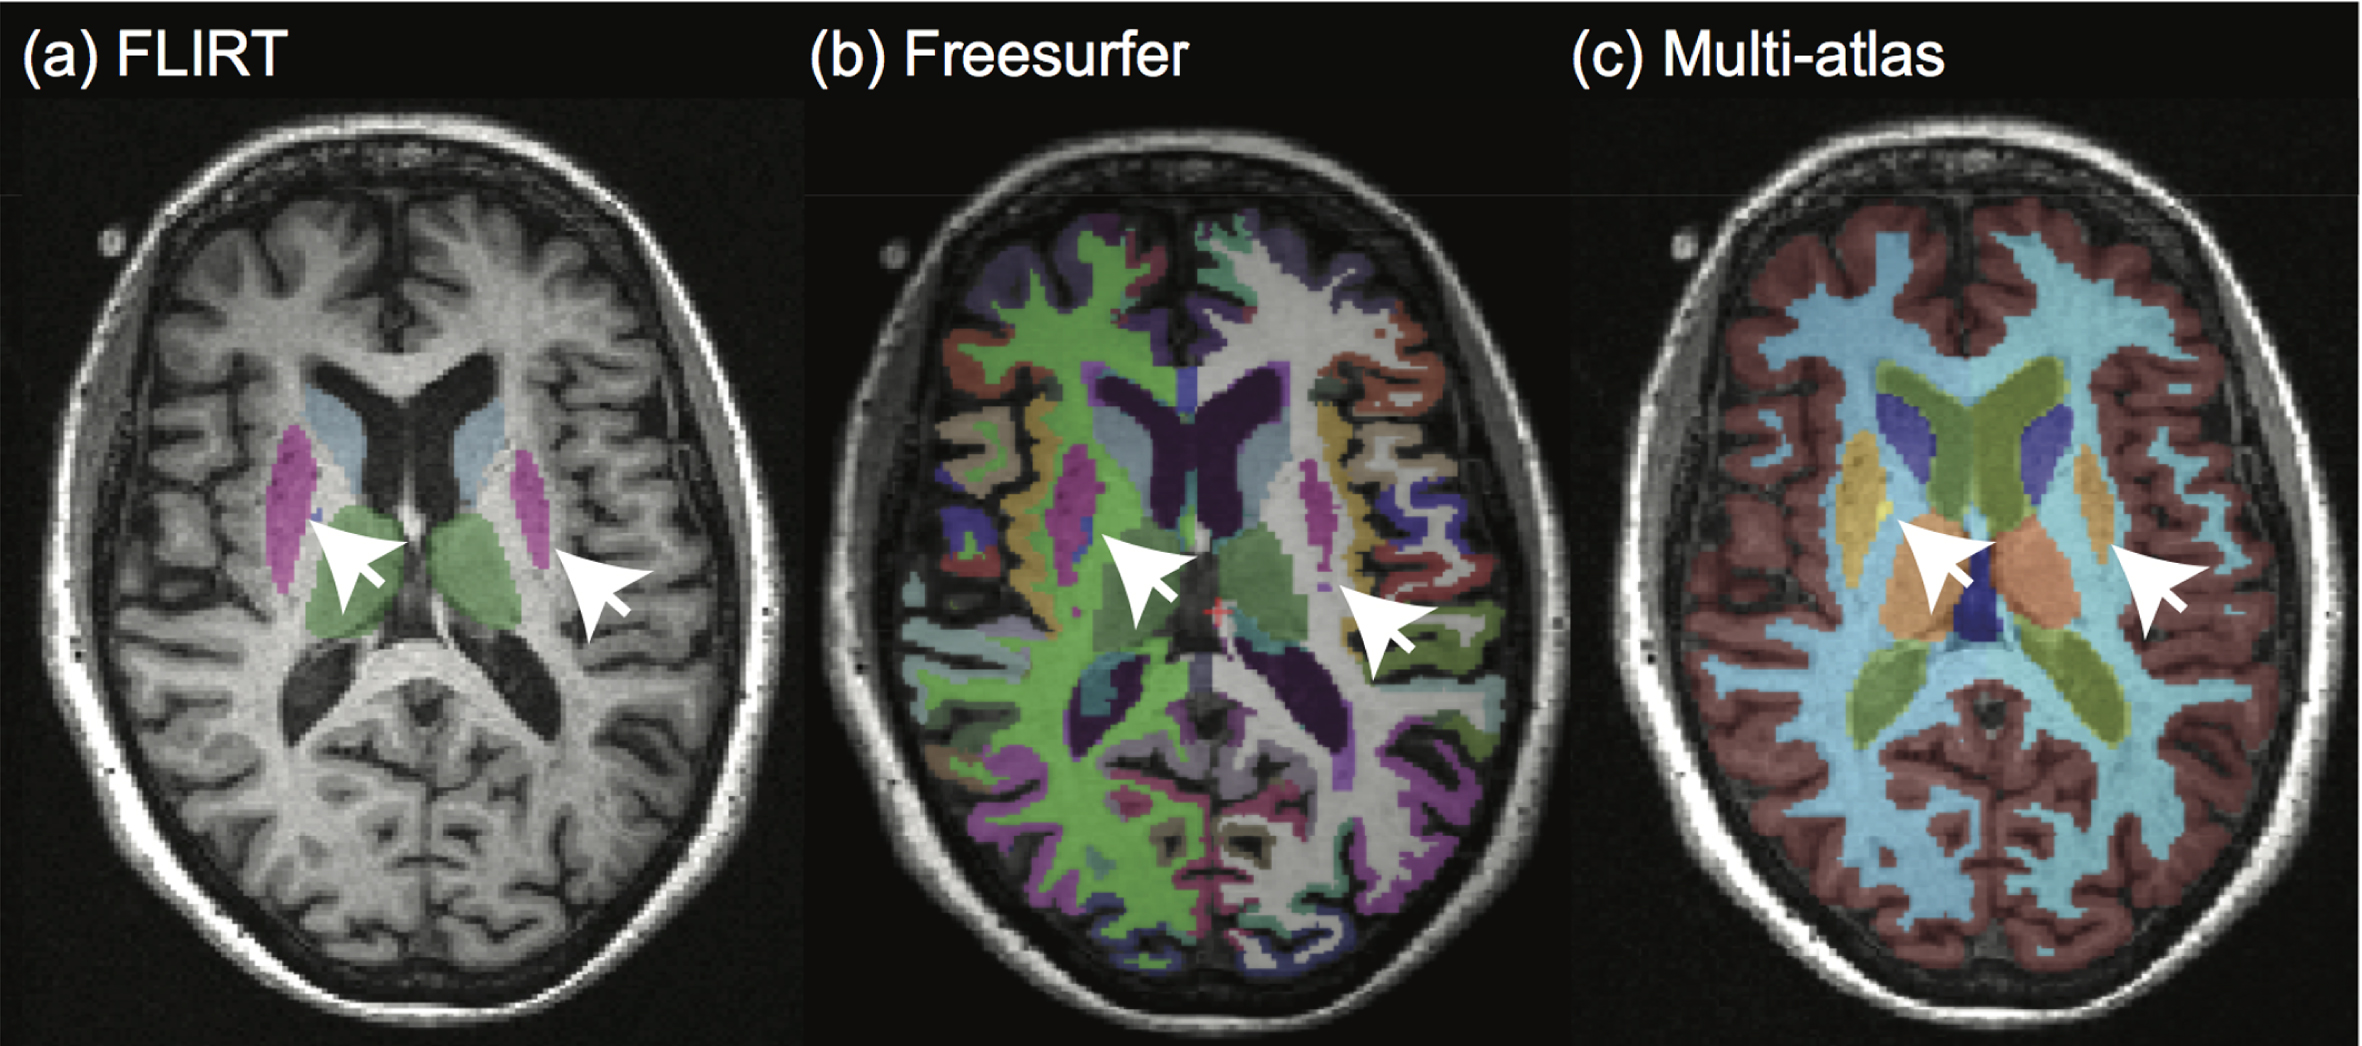 Subcortical segmentation output using FIRST, FreeSurfer and Multi-atlas segmentation in the same subject and slice location. Differences are evident in the segmentation of the putamen [pink in (a) and (b), dark yellow in (c)] and the pallidum [blue in (a) and (b), bright yellow in (c)].